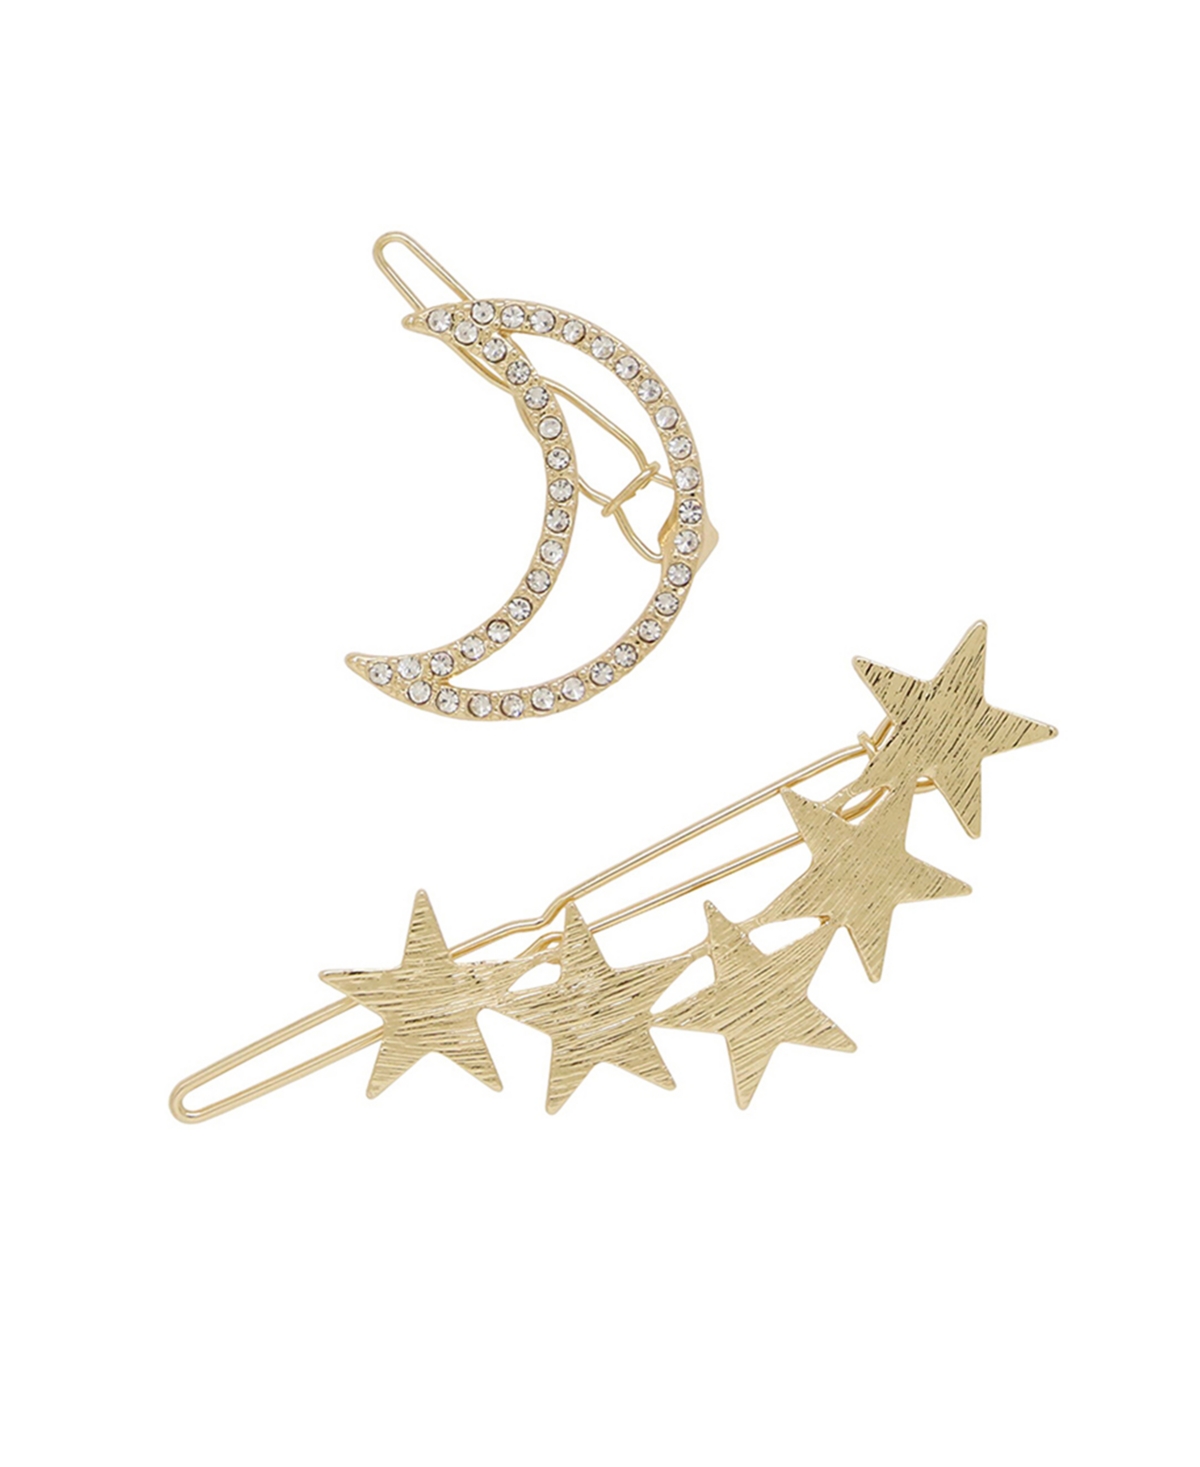 Stars and Moon Hair Barrettes in Gold-Tone, Set of 2 - Gold